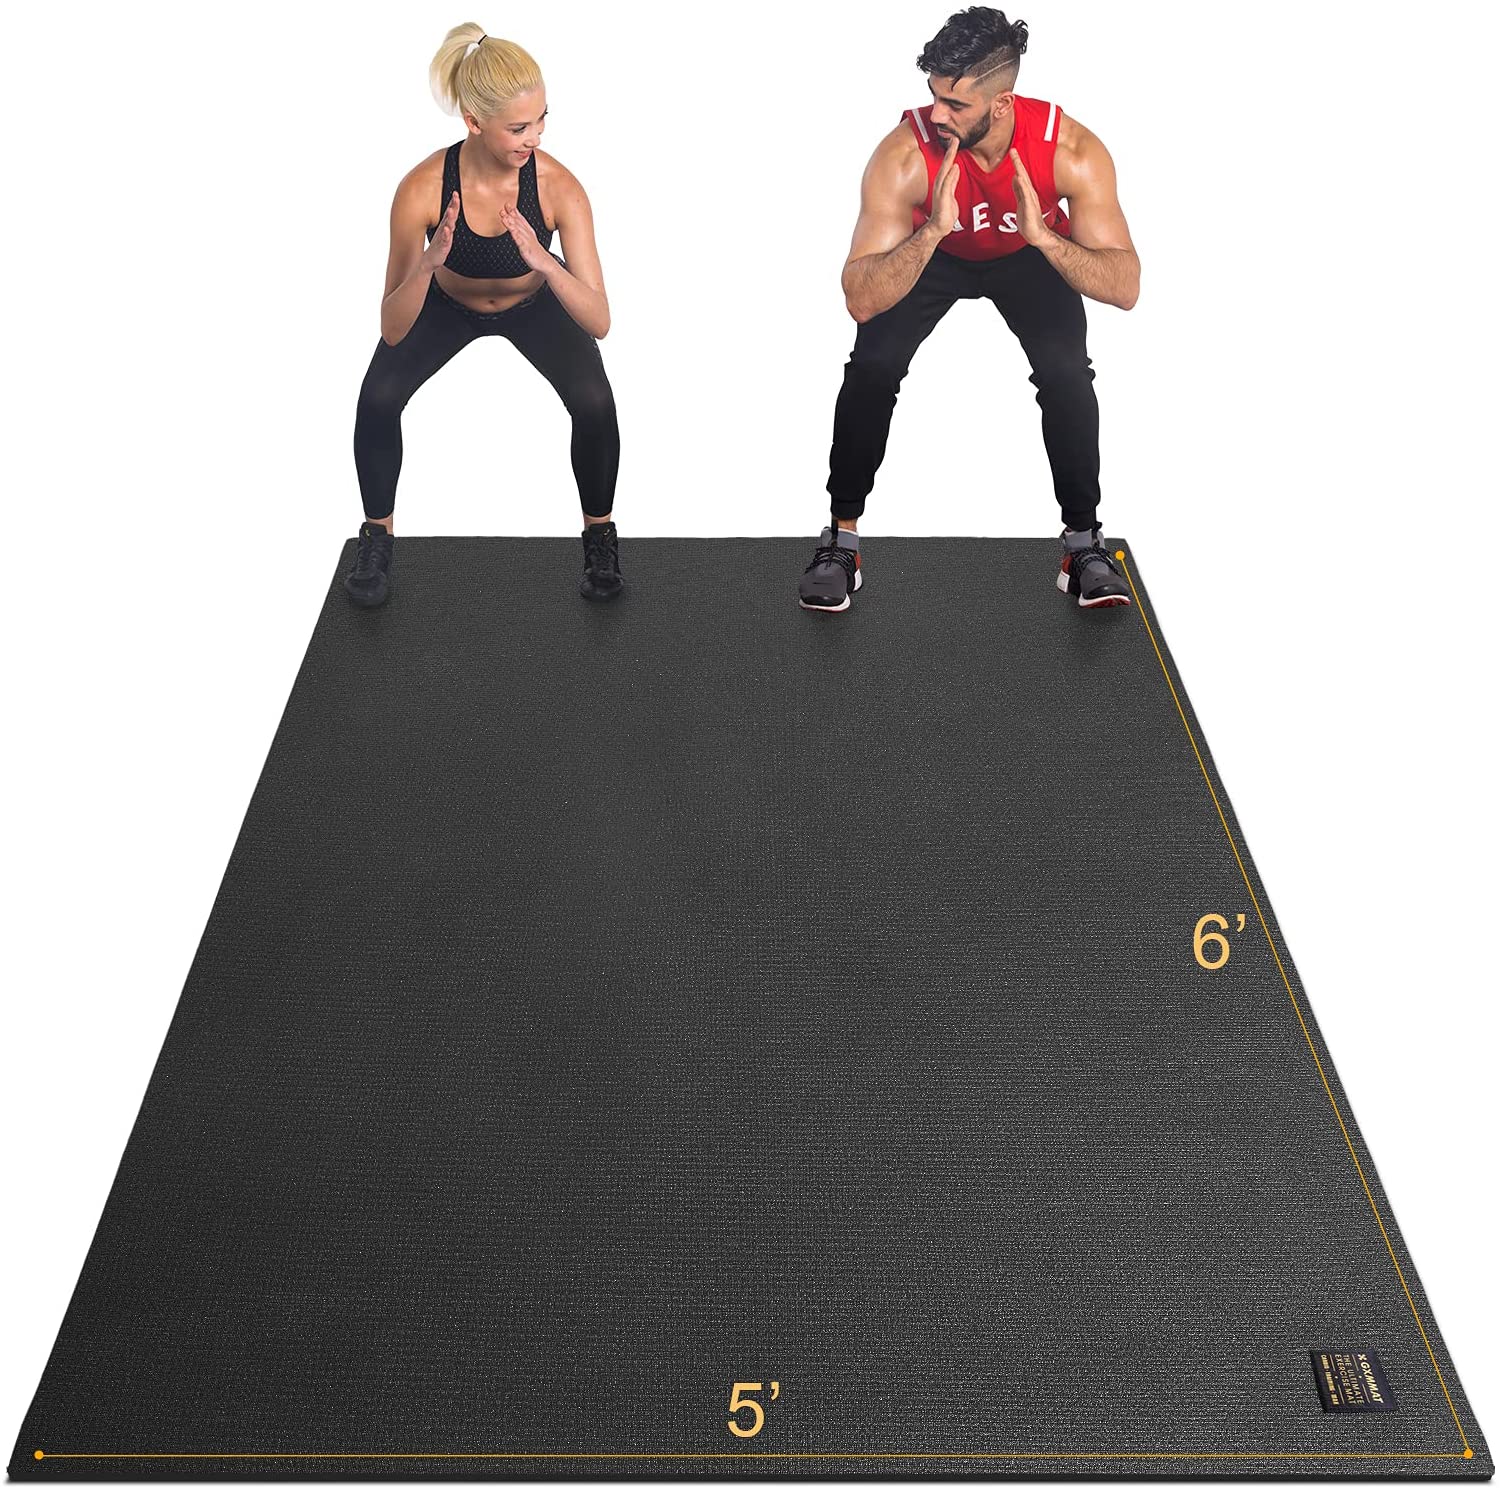 Photo 1 of GXMMAT Large Exercise Mat 6x5x7mm NonSlip Workout Mats for Home Gym Flooring Extra Wide and Thick Durable Cardio Mat High Density Shoe Friendly Great for Plyo MMA Jump Rope Stretch Fitness